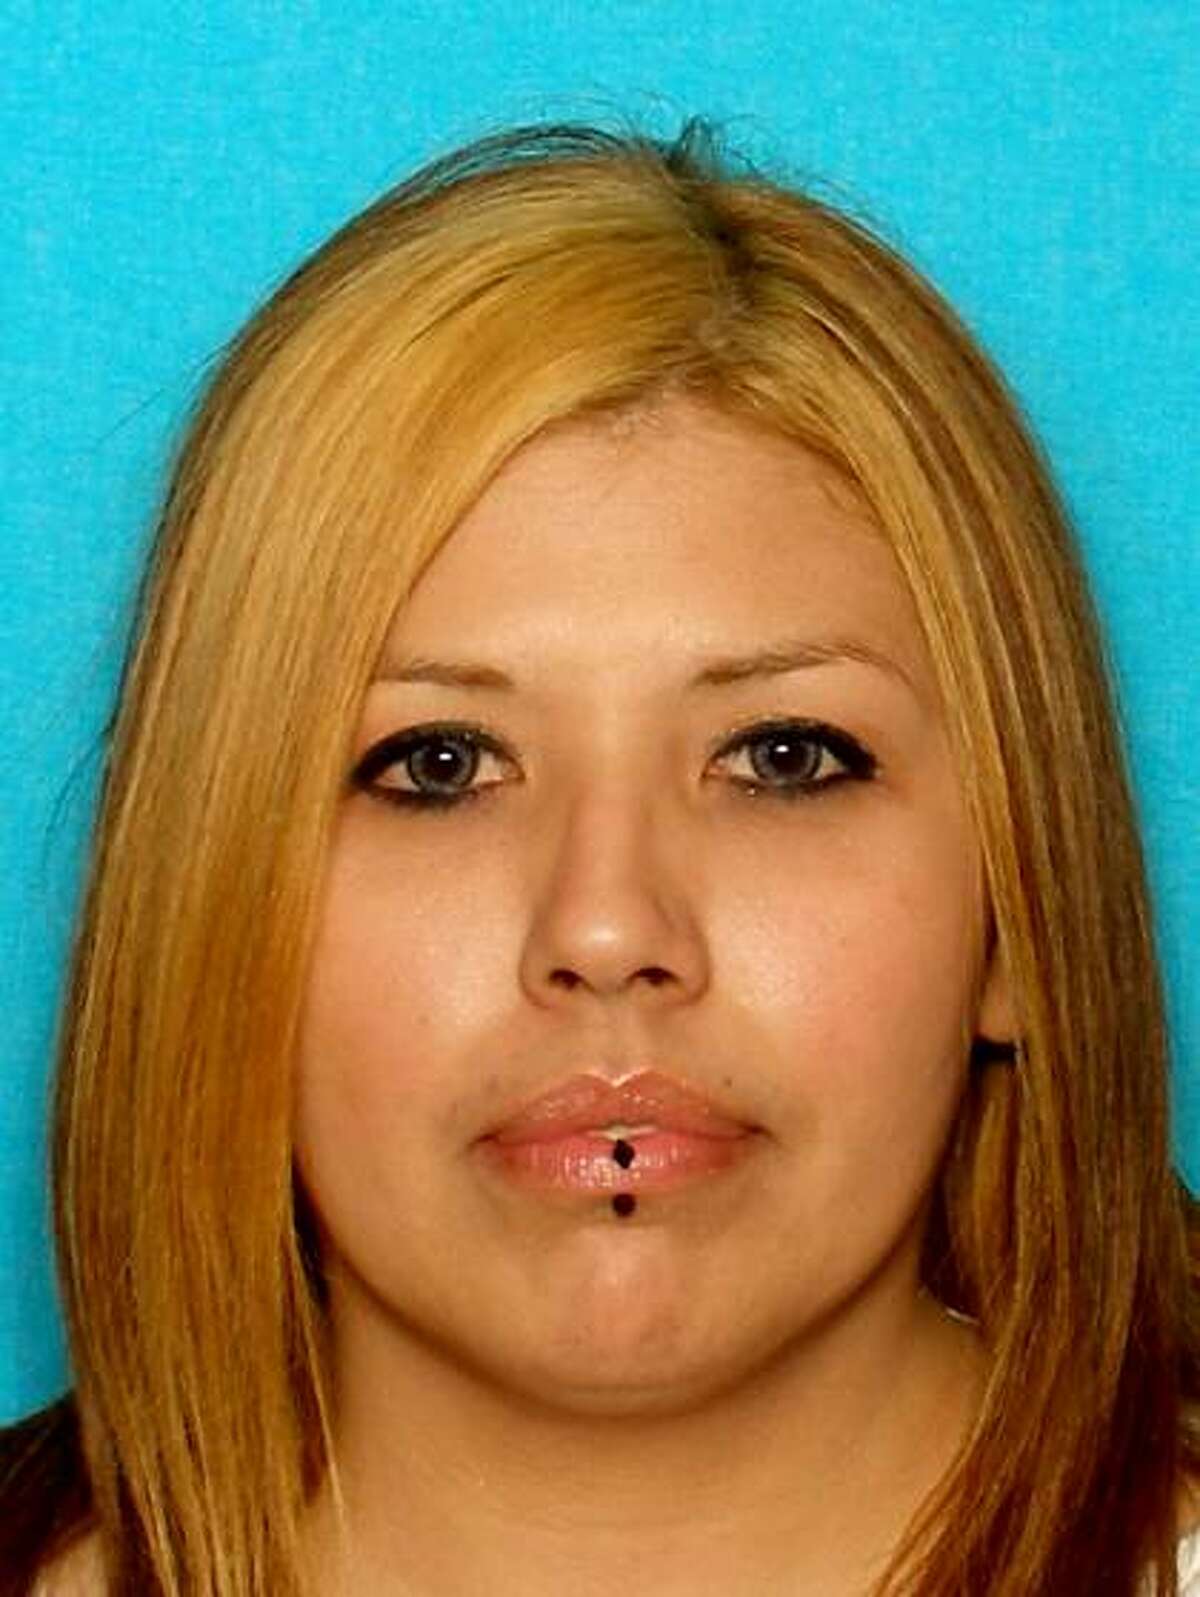 Mercedes Salazar, 32, is currently wanted on an aggravated kidnapping charge. She has been booked into the Bexar County Jail 11 times on 43 different charges since she was 17, according to the Sheriff's Office.